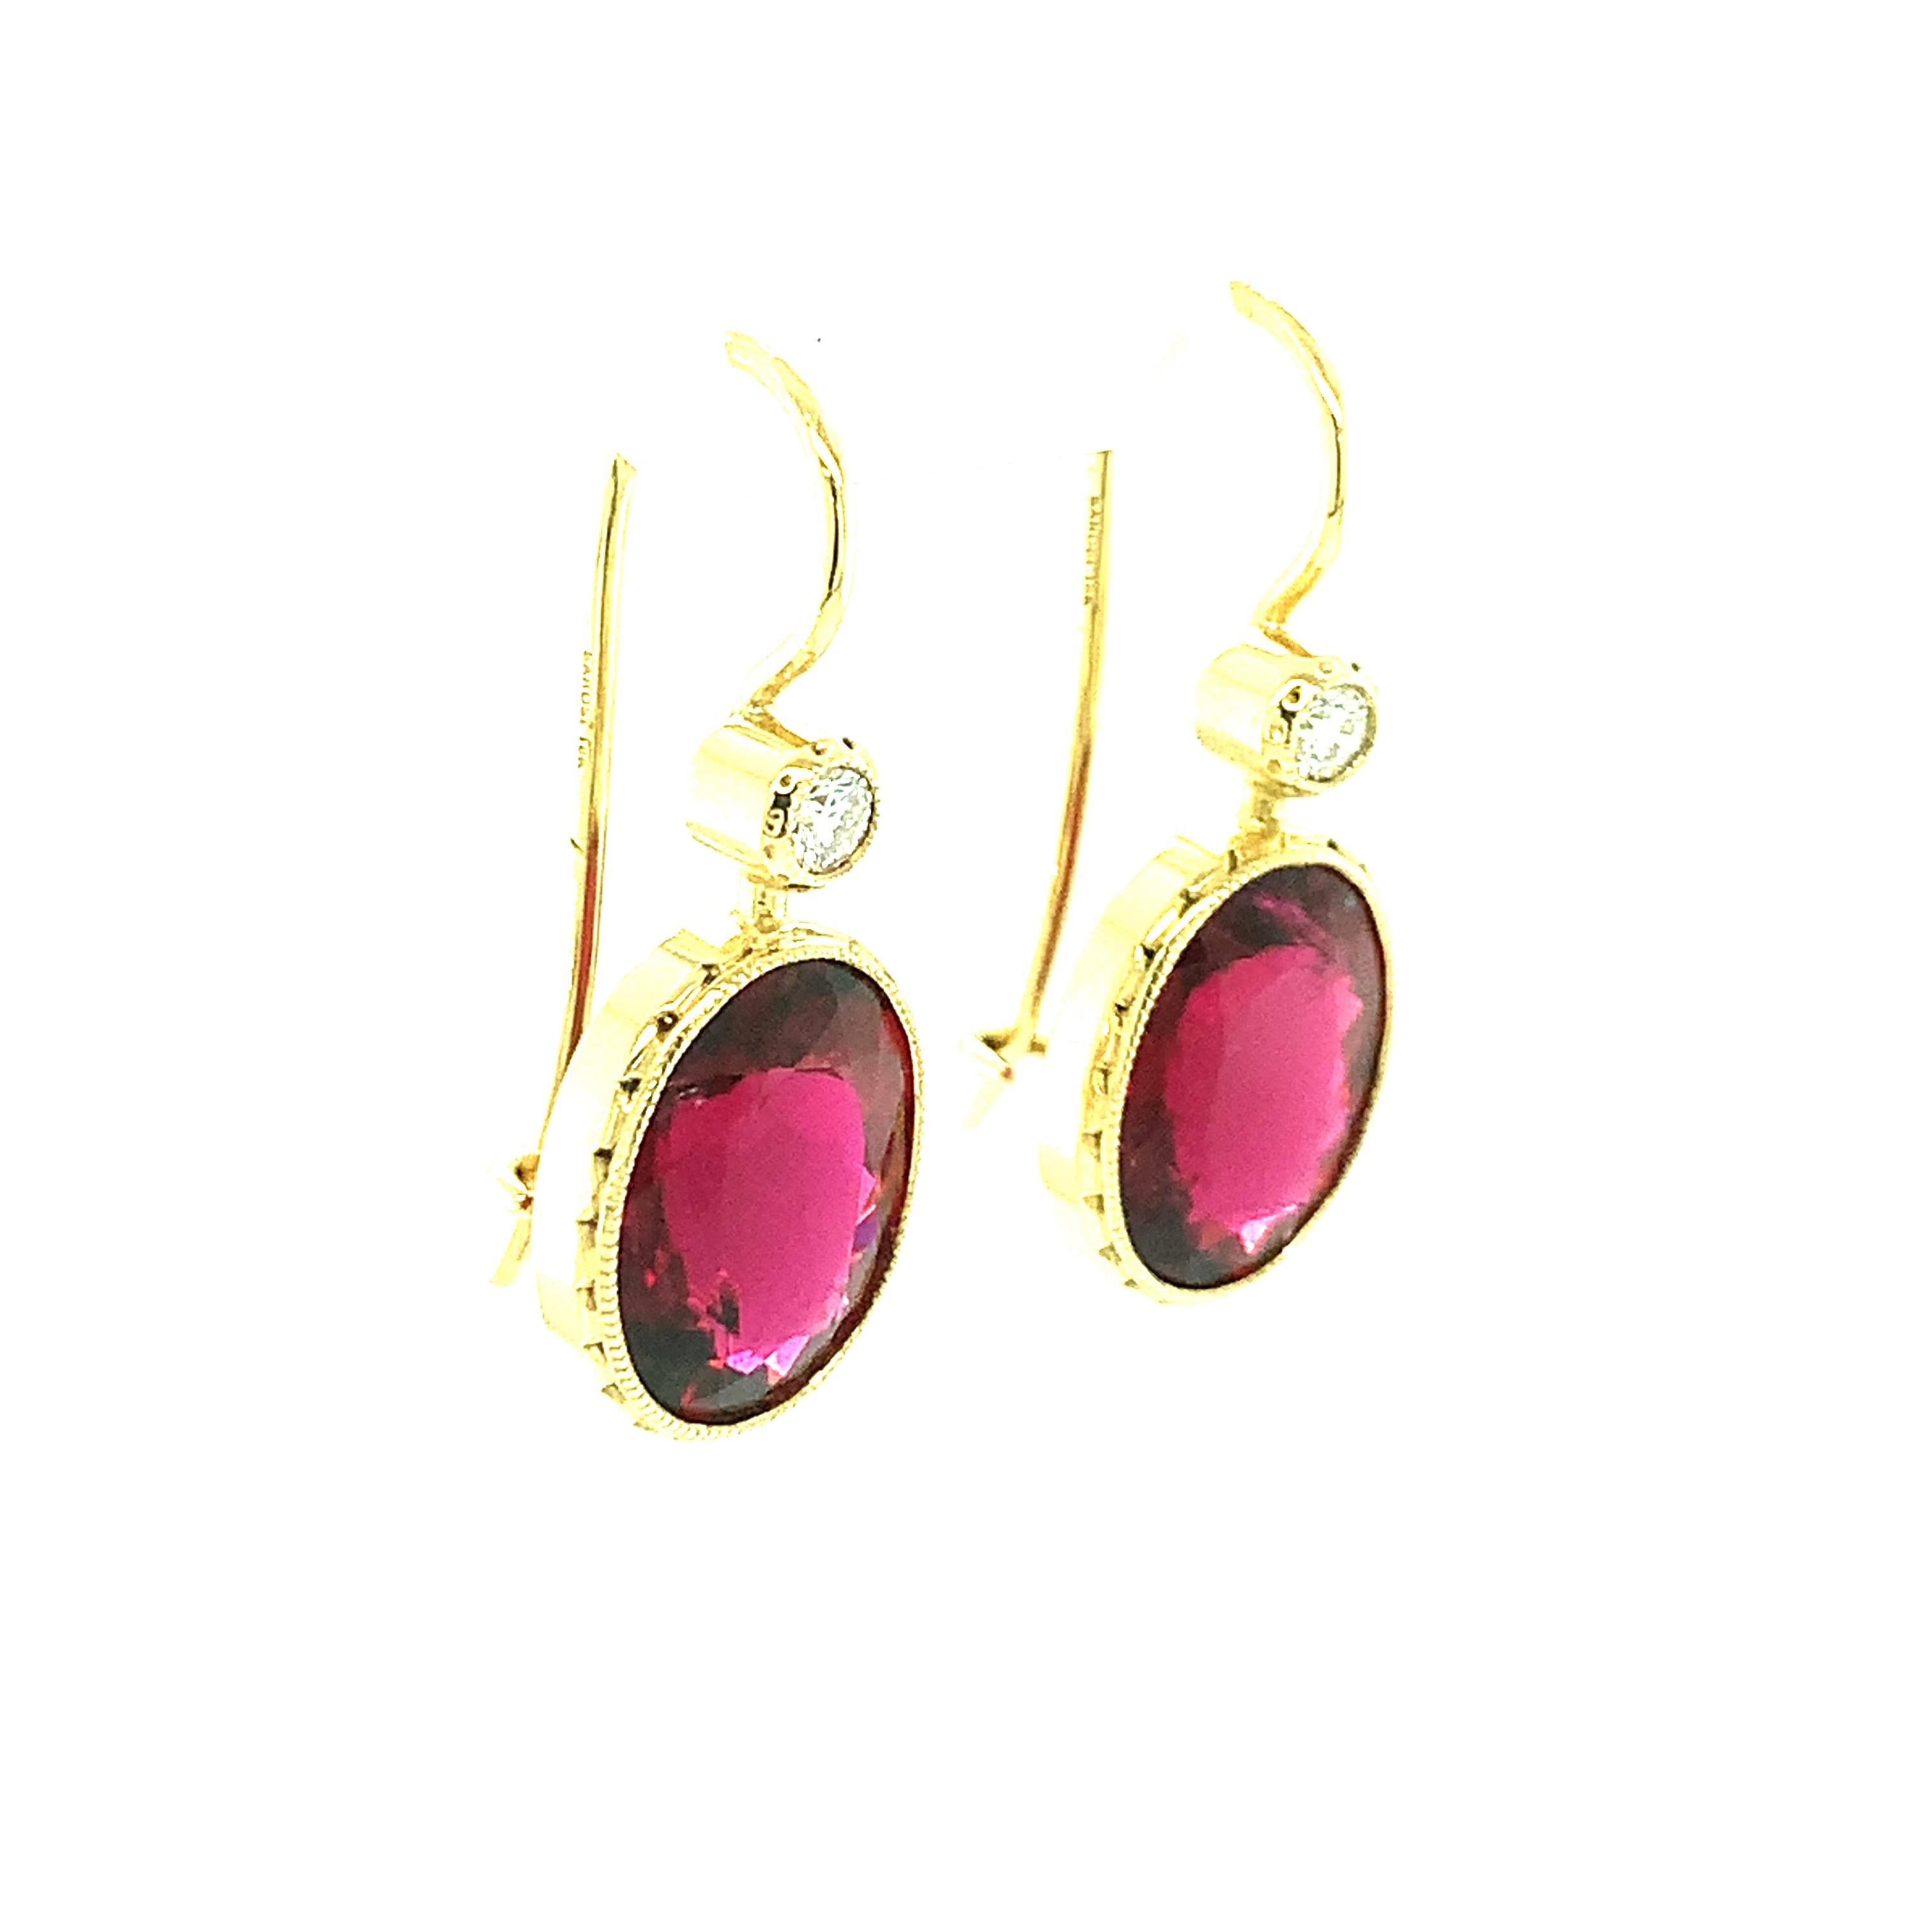 These beautiful rubellite tourmaline and diamond drop earrings will elevate any outfit with their eye-catching burst of color! Reddish-pink tourmaline as richly colored and vibrant as these are very rare, and especially hard to find in large matched